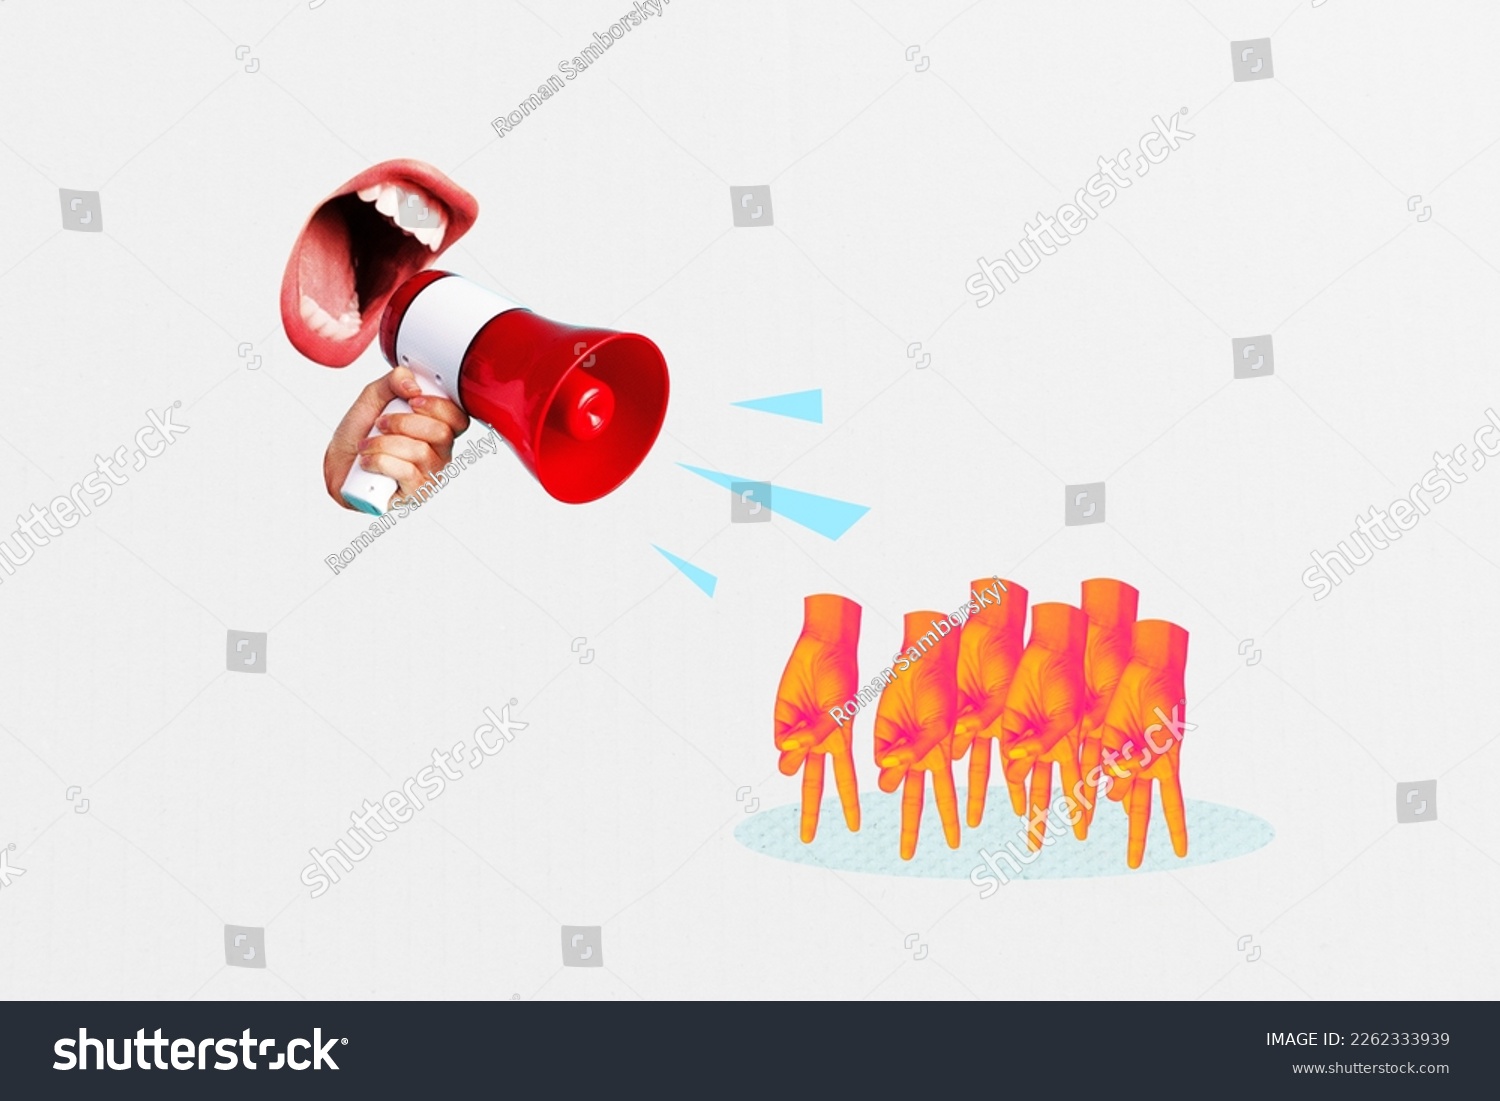 Composite collage image of yelling talking mouth scream loudspeaker mini standing people arms fingers isolated on white background #2262333939